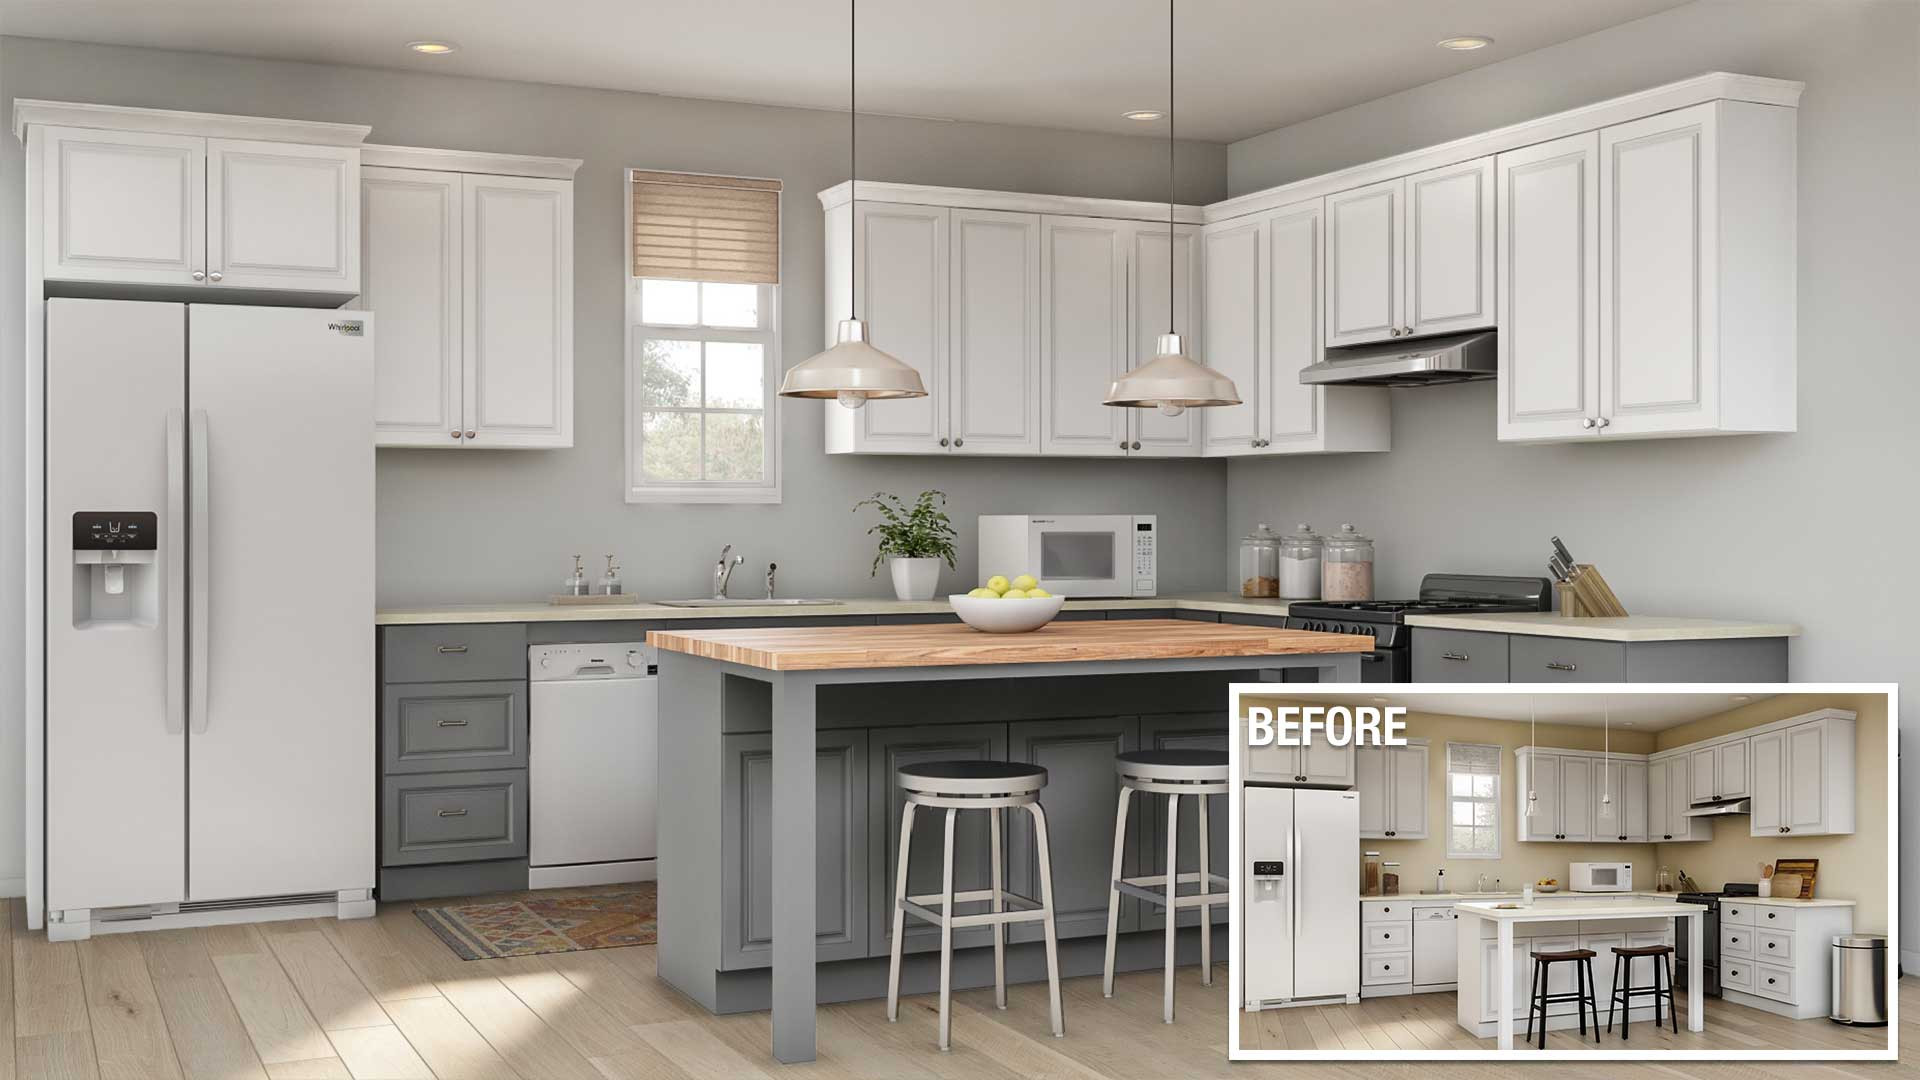 Home Depot Kitchen Remodel Cost
 Cost to Remodel a Kitchen The Home Depot